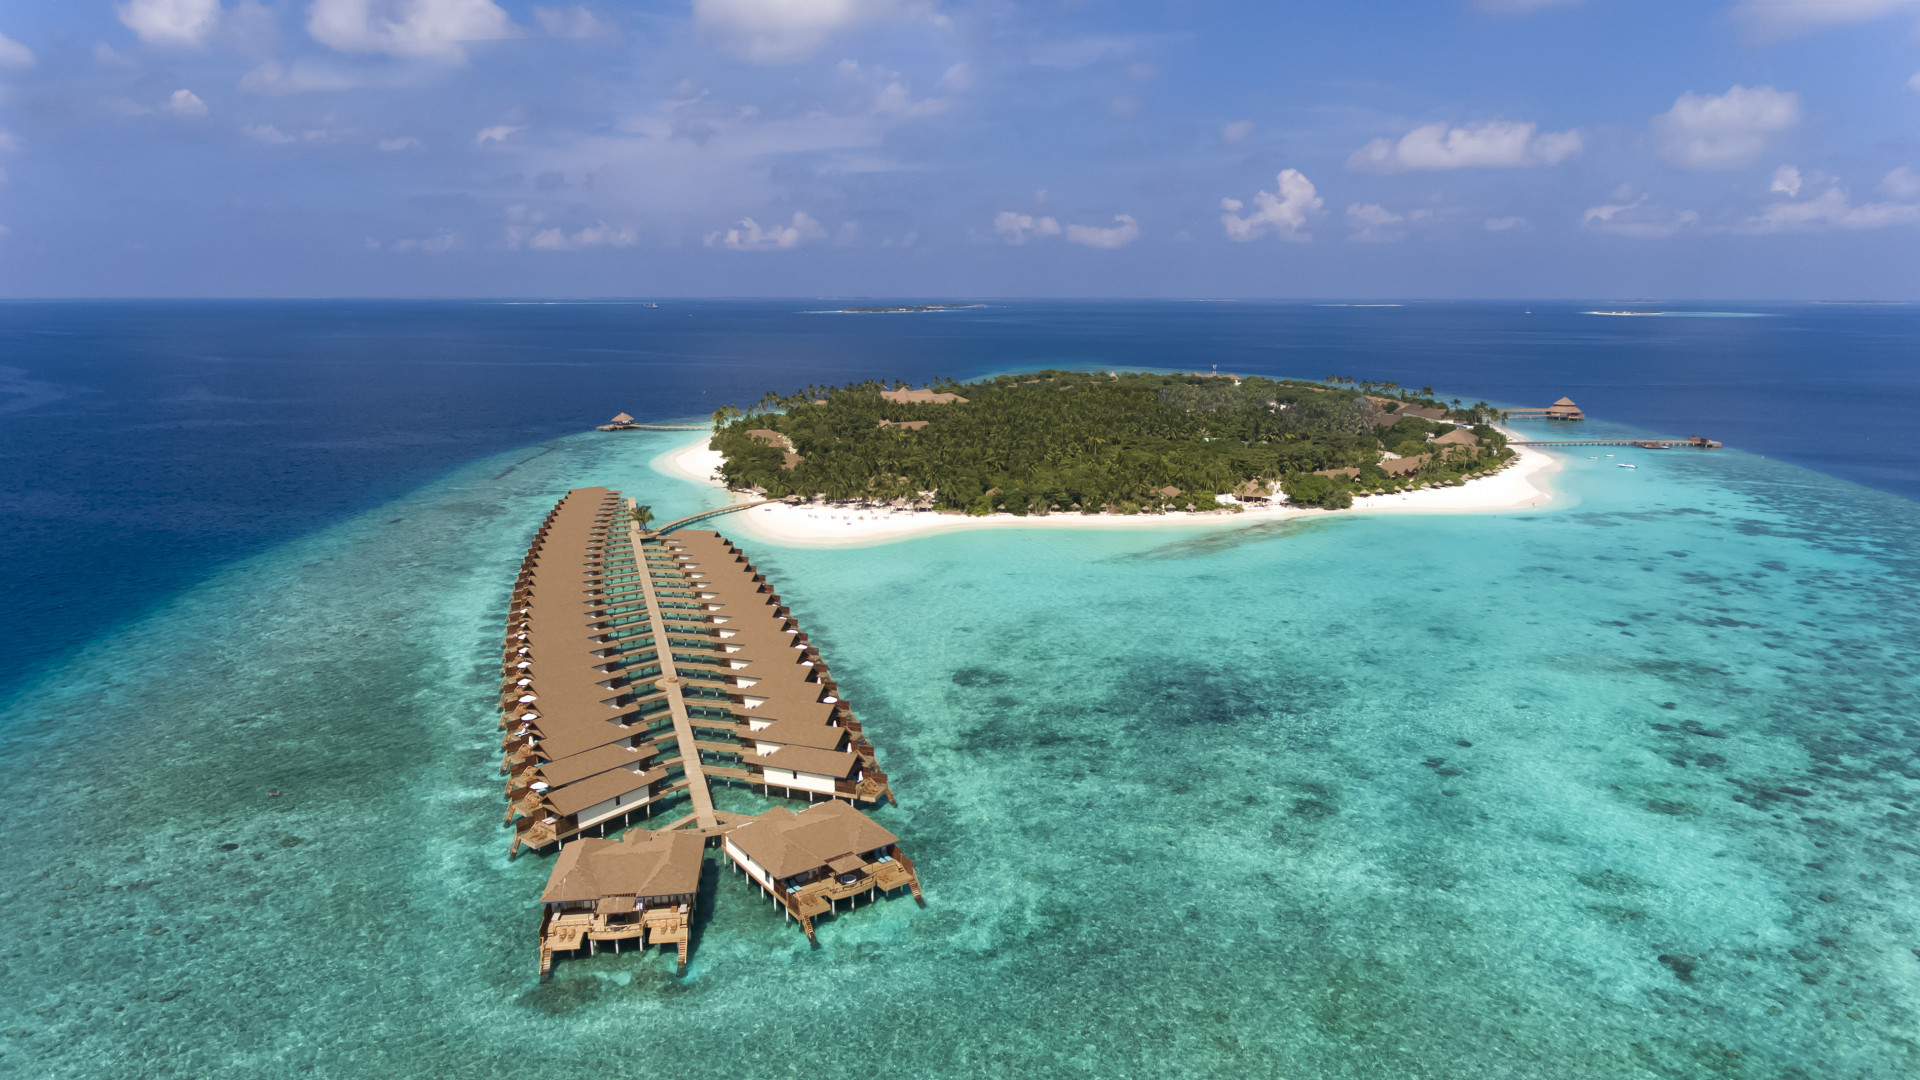 Green Pearls sustainable resort in the Maldives